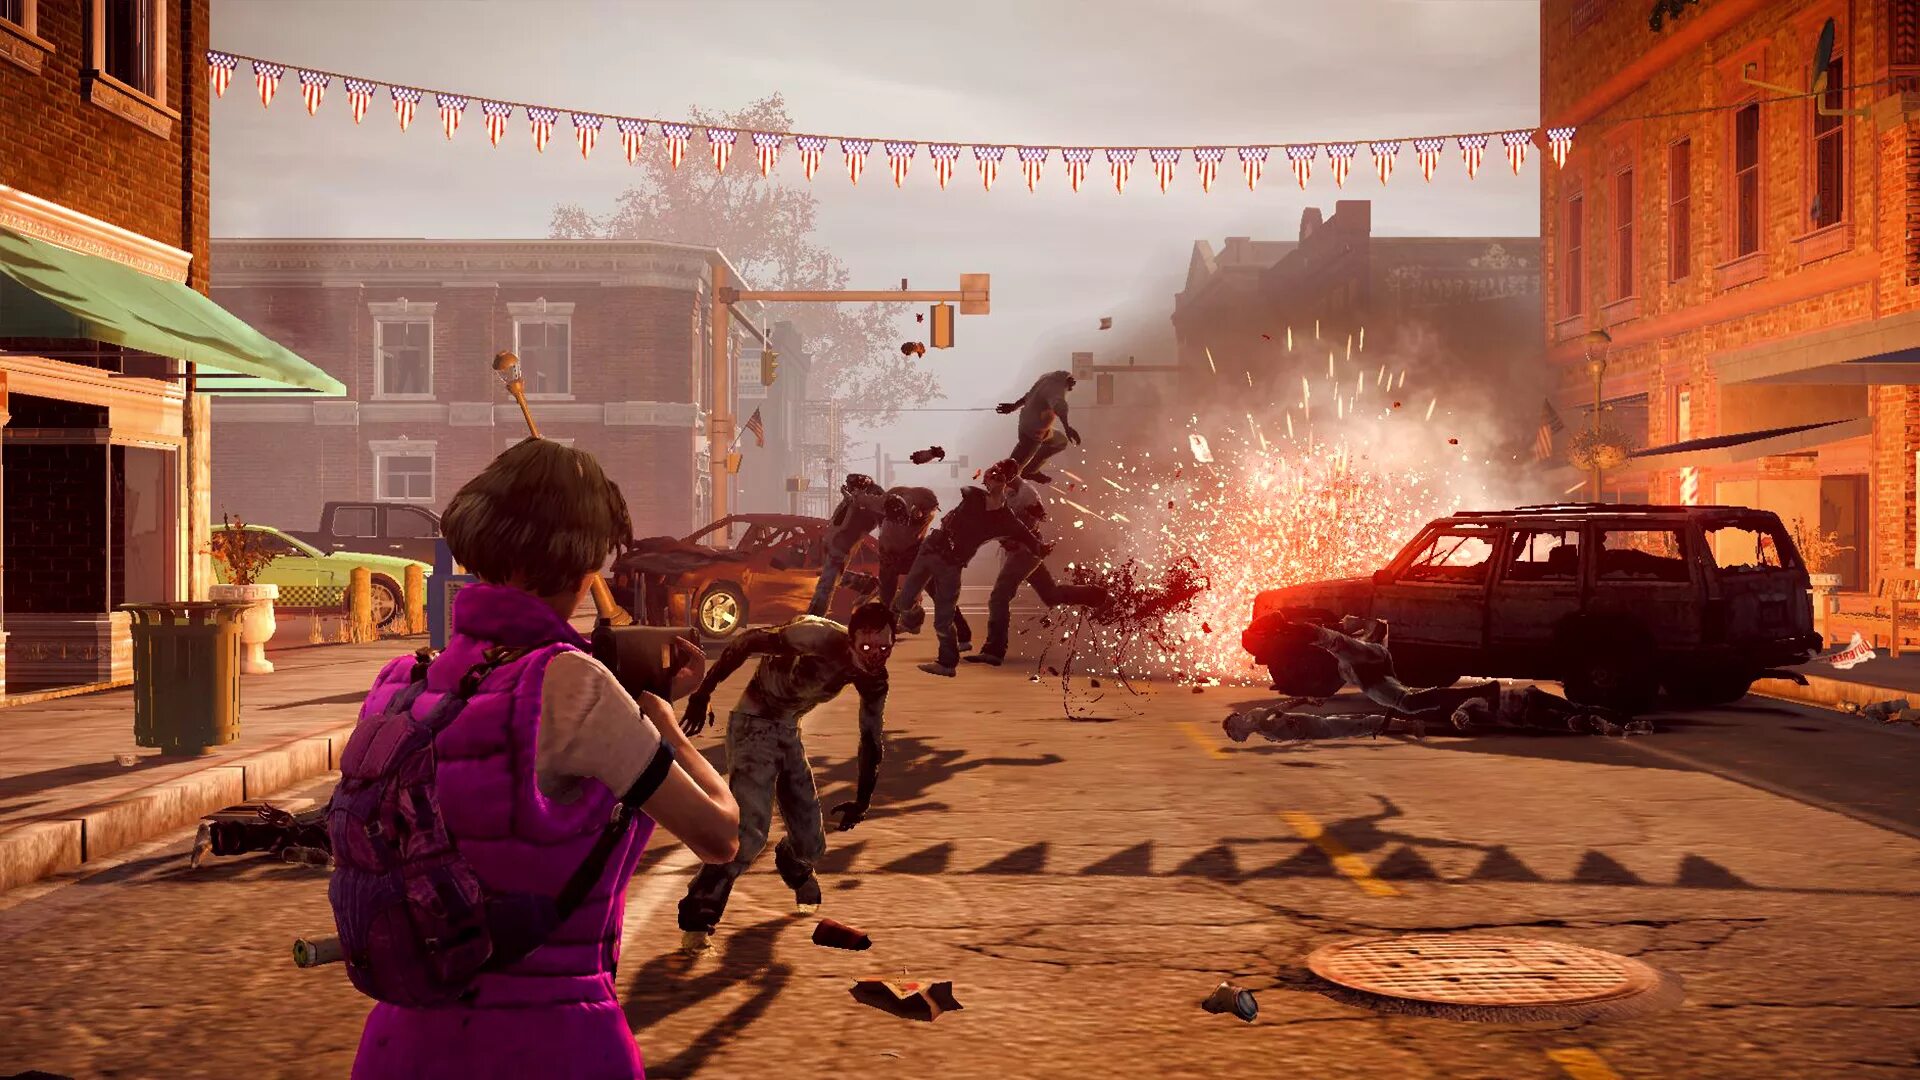 Igra. Игра State of Decay 2. State of Decay 2 Скриншоты. DC State.